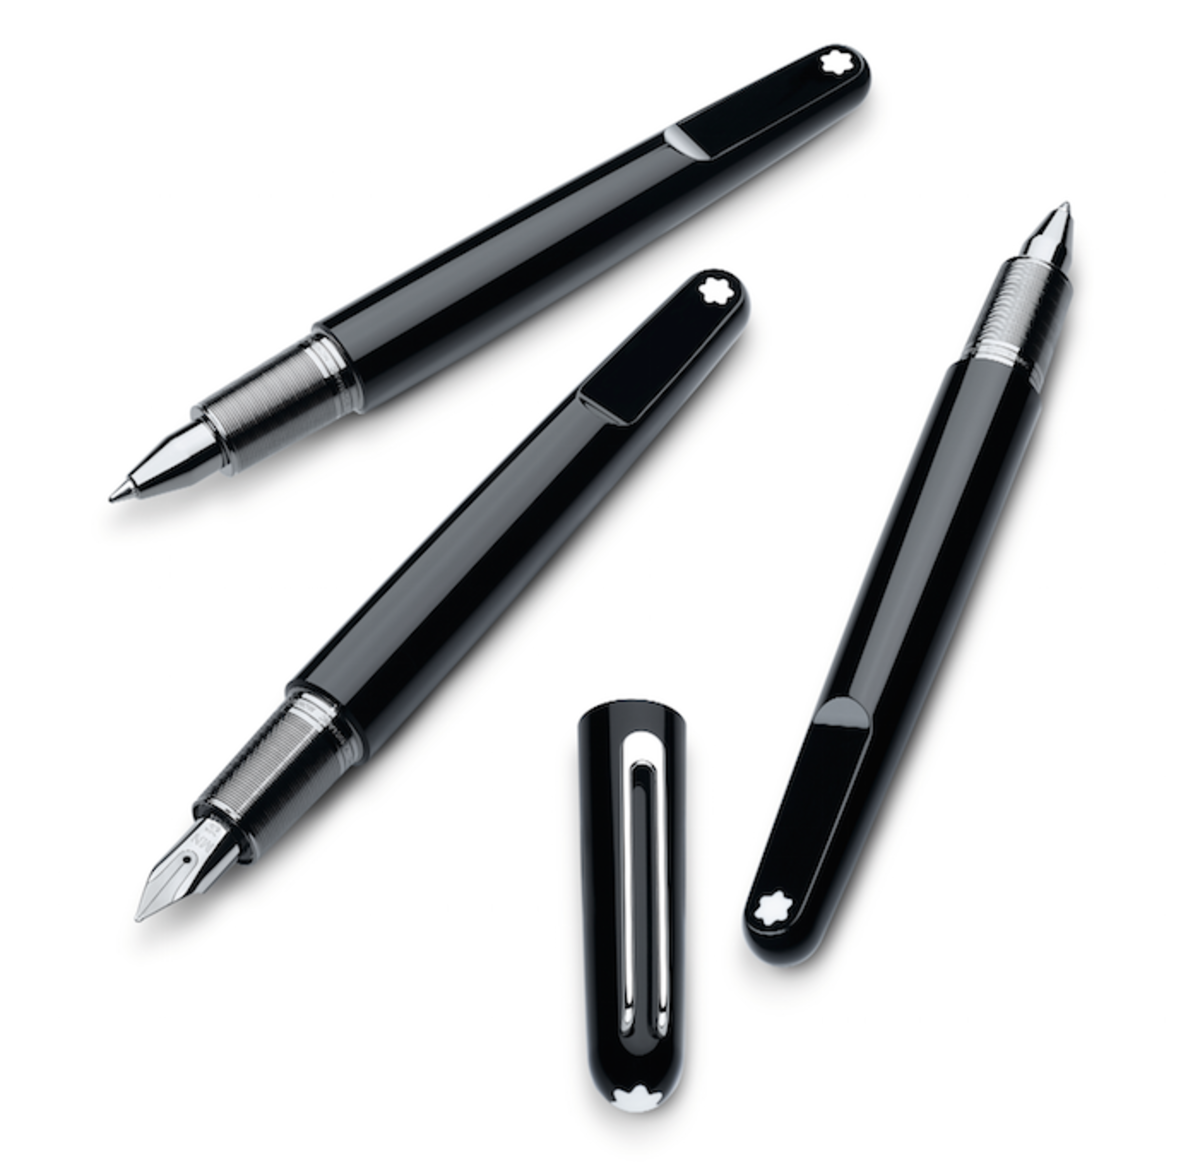 The Montblanc M by Marc Newson - Acquire